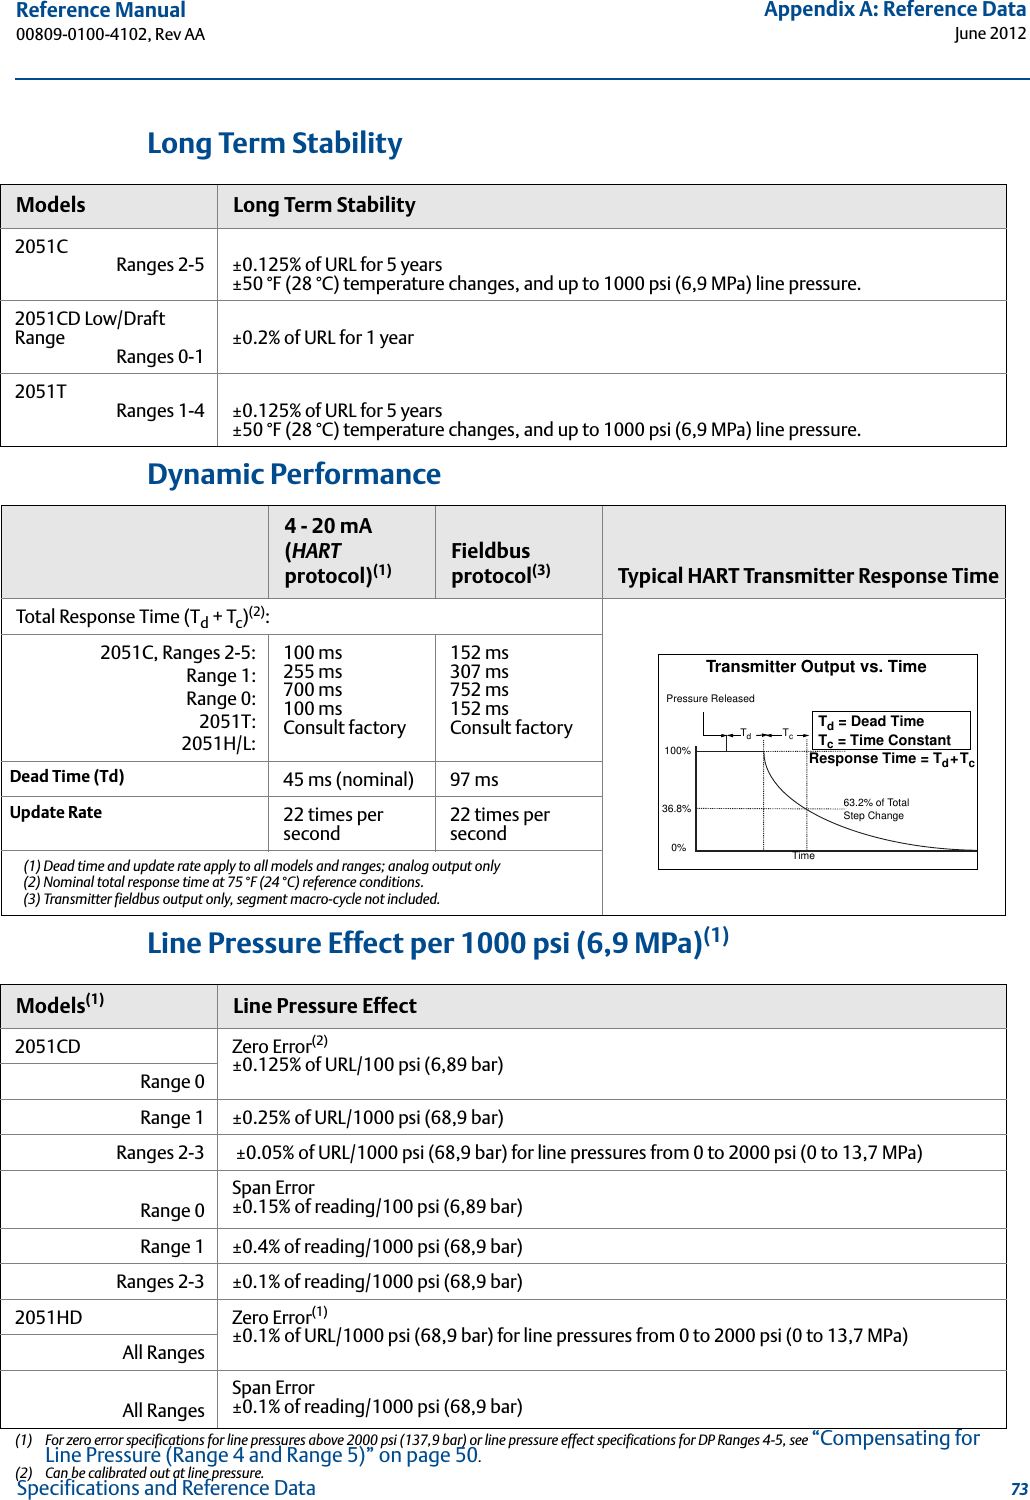 73Reference Manual 00809-0100-4102, Rev AAAppendix A: Reference DataJune 2012Specifications and Reference DataLong Term StabilityDynamic PerformanceLine Pressure Effect per 1000 psi (6,9 MPa)(1)Models Long Term Stability2051C Ranges 2-5 ±0.125% of URL for 5 years±50 °F (28 °C) temperature changes, and up to 1000 psi (6,9 MPa) line pressure.2051CD Low/Draft Range Ranges 0-1 ±0.2% of URL for 1 year2051T Ranges 1-4 ±0.125% of URL for 5 years±50 °F (28 °C) temperature changes, and up to 1000 psi (6,9 MPa) line pressure.4 - 20 mA (HART protocol)(1)Fieldbus protocol(3) Typical HART Transmitter Response TimeTotal Response Time (Td + Tc)(2):2051C, Ranges 2-5:Range 1:Range 0:2051T:2051H/L:100 ms 255 ms700 ms100 ms Consult factory152 ms307 ms752 ms152 msConsult factoryDead Time (Td) 45 ms (nominal) 97 msUpdate Rate 22 times per second 22 times per second(1) Dead time and update rate apply to all models and ranges; analog output only(2) Nominal total response time at 75 °F (24 °C) reference conditions. (3) Transmitter fieldbus output only, segment macro-cycle not included.Models(1)(1) For zero error specifications for line pressures above 2000 psi (137,9 bar) or line pressure effect specifications for DP Ranges 4-5, see “Compensating for Line Pressure (Range 4 and Range 5)” on page 50.Line Pressure Effect2051CD Zero Error(2)±0.125% of URL/100 psi (6,89 bar)(2) Can be calibrated out at line pressure.Range 0Range 1 ±0.25% of URL/1000 psi (68,9 bar)Ranges 2-3  ±0.05% of URL/1000 psi (68,9 bar) for line pressures from 0 to 2000 psi (0 to 13,7 MPa)Range 0Span Error±0.15% of reading/100 psi (6,89 bar)Range 1 ±0.4% of reading/1000 psi (68,9 bar)Ranges 2-3 ±0.1% of reading/1000 psi (68,9 bar)2051HD Zero Error(1)±0.1% of URL/1000 psi (68,9 bar) for line pressures from 0 to 2000 psi (0 to 13,7 MPa)All RangesAll RangesSpan Error±0.1% of reading/1000 psi (68,9 bar)TcTdTd = Dead TimeTc = Time ConstantPressure ReleasedResponse Time = Td+Tc63.2% of TotalStep ChangeTime0%100%36.8%Transmitter Output vs. Time